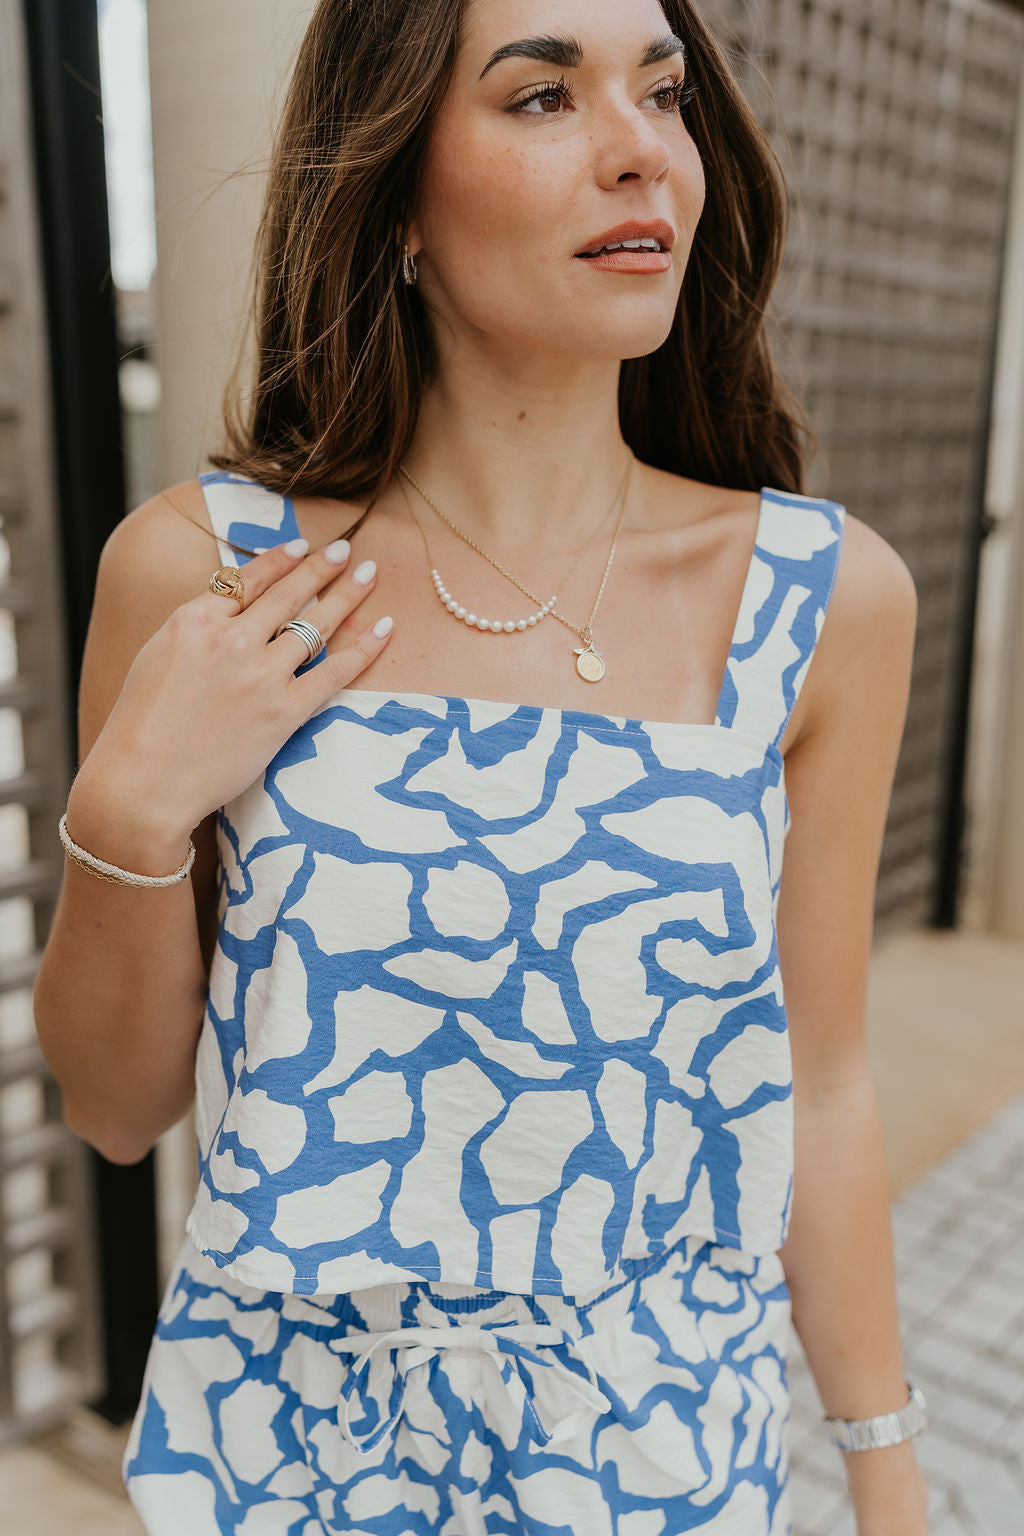 Close up view of female model wearing the Lainey Blue & White Cropped Tank which features Blue and White Lightweight Fabric, White Lining, Monochrome side zipper with hook closure, Square Neckline and Thick Straps